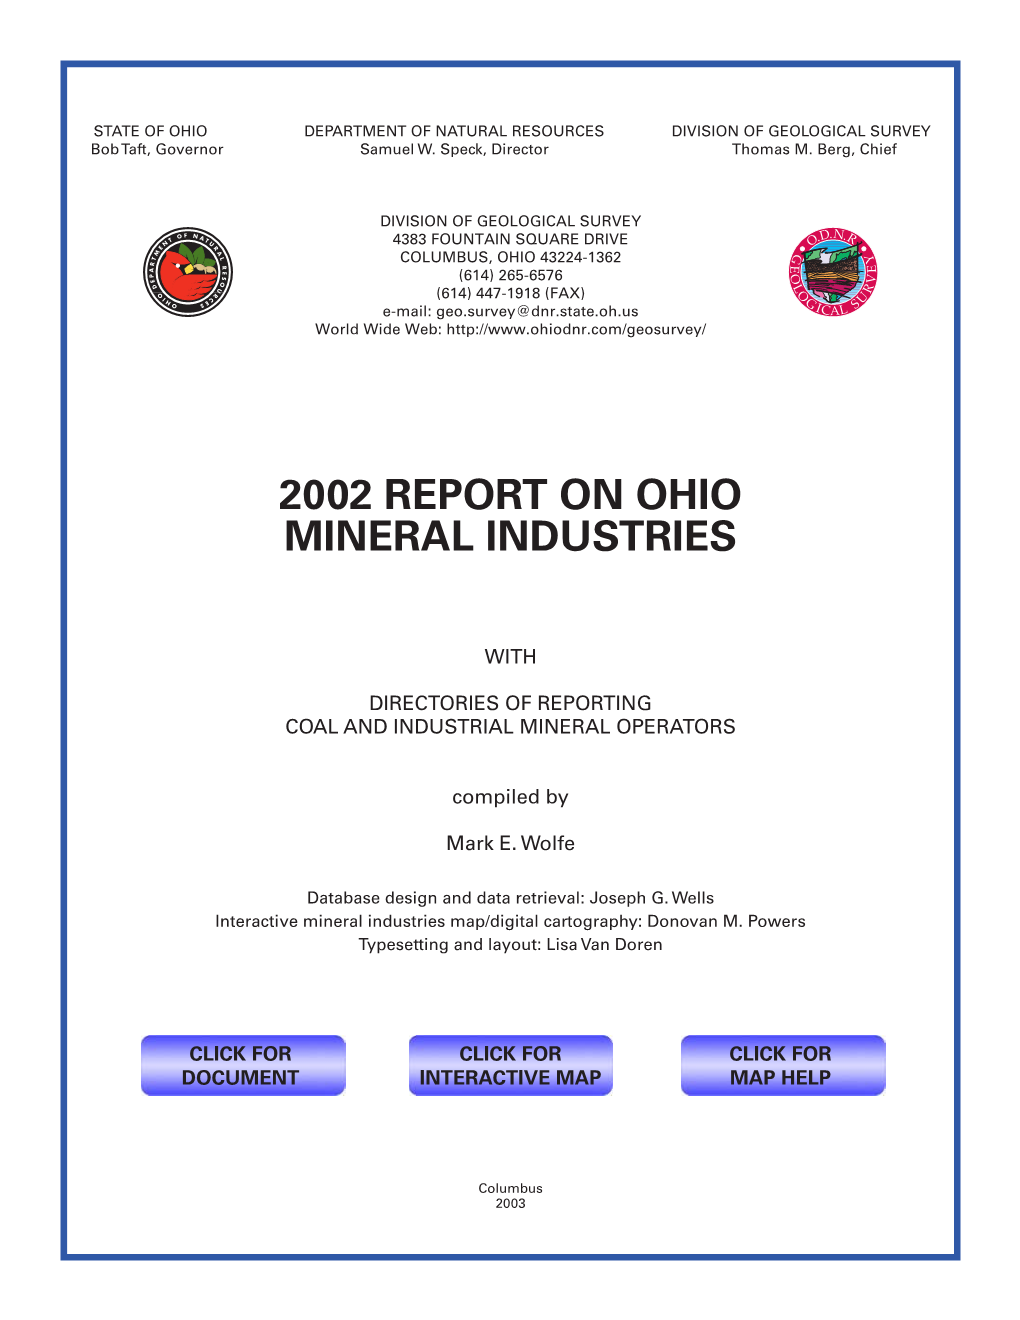 2002 Report on Ohio Mineral Industries